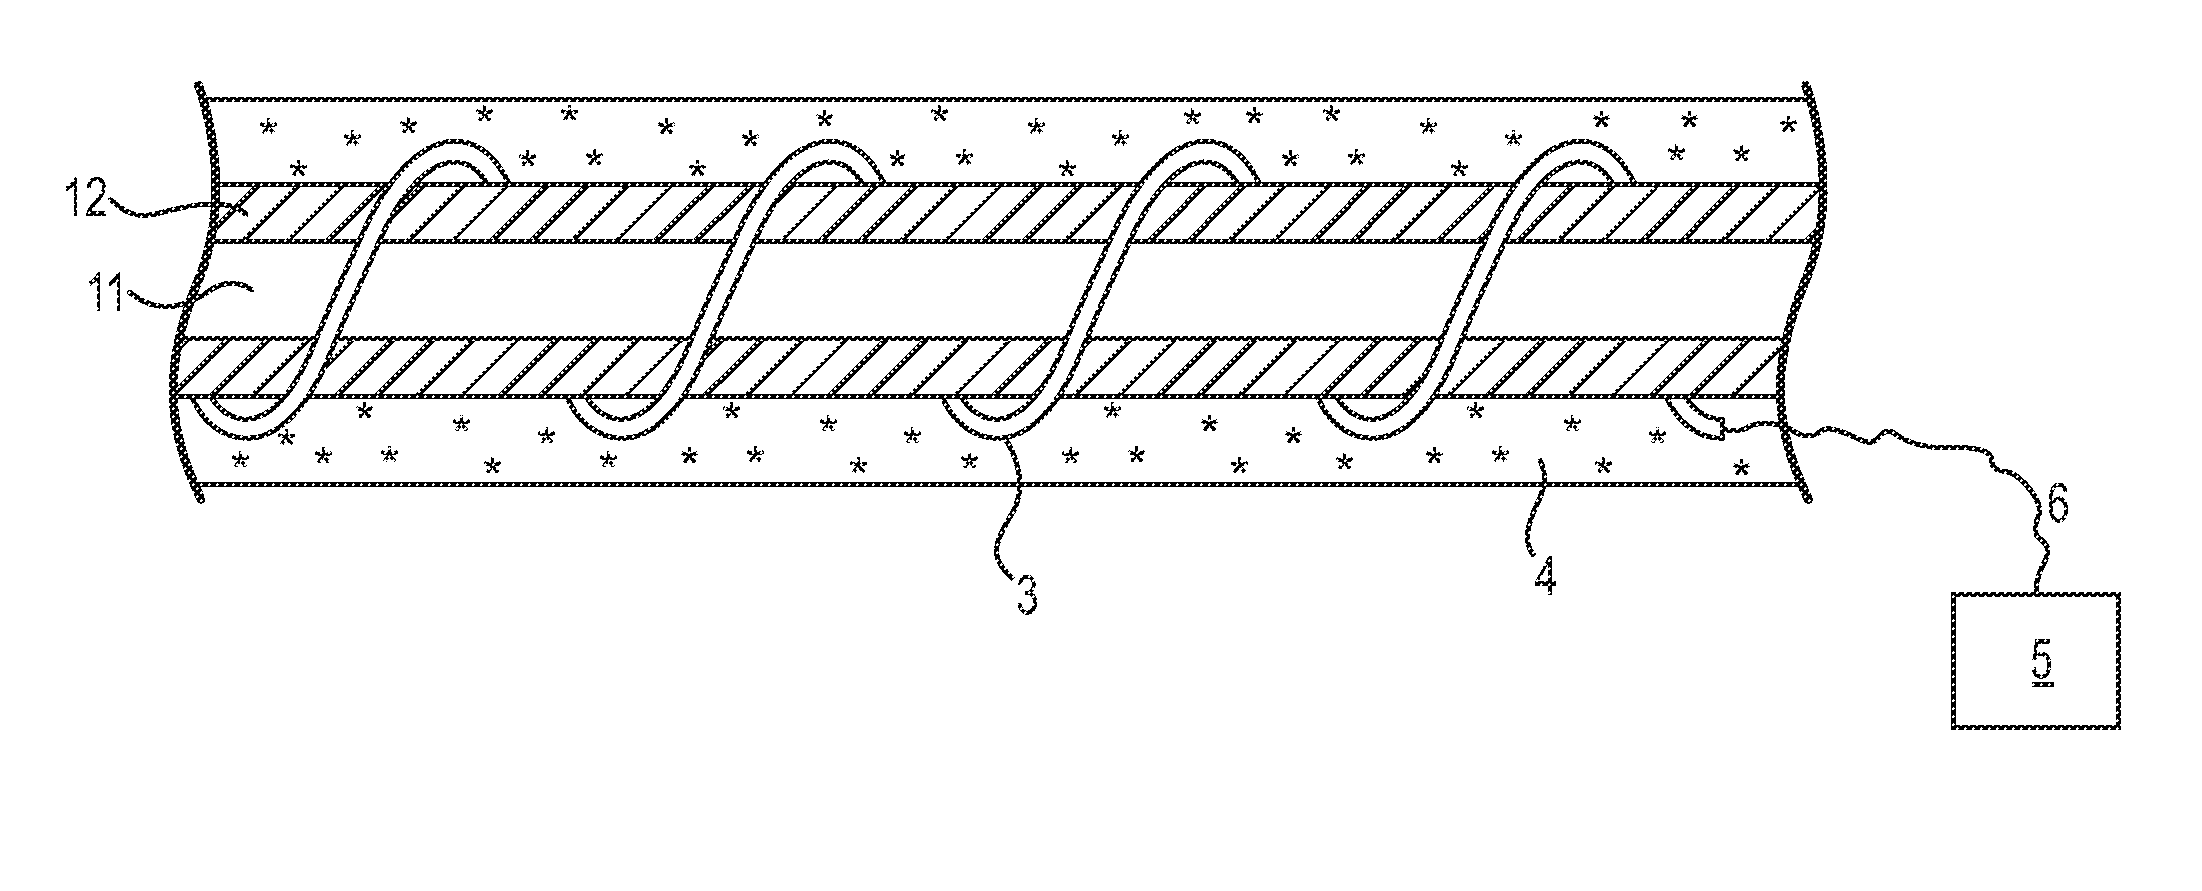 Electrically Conductive Composite Material